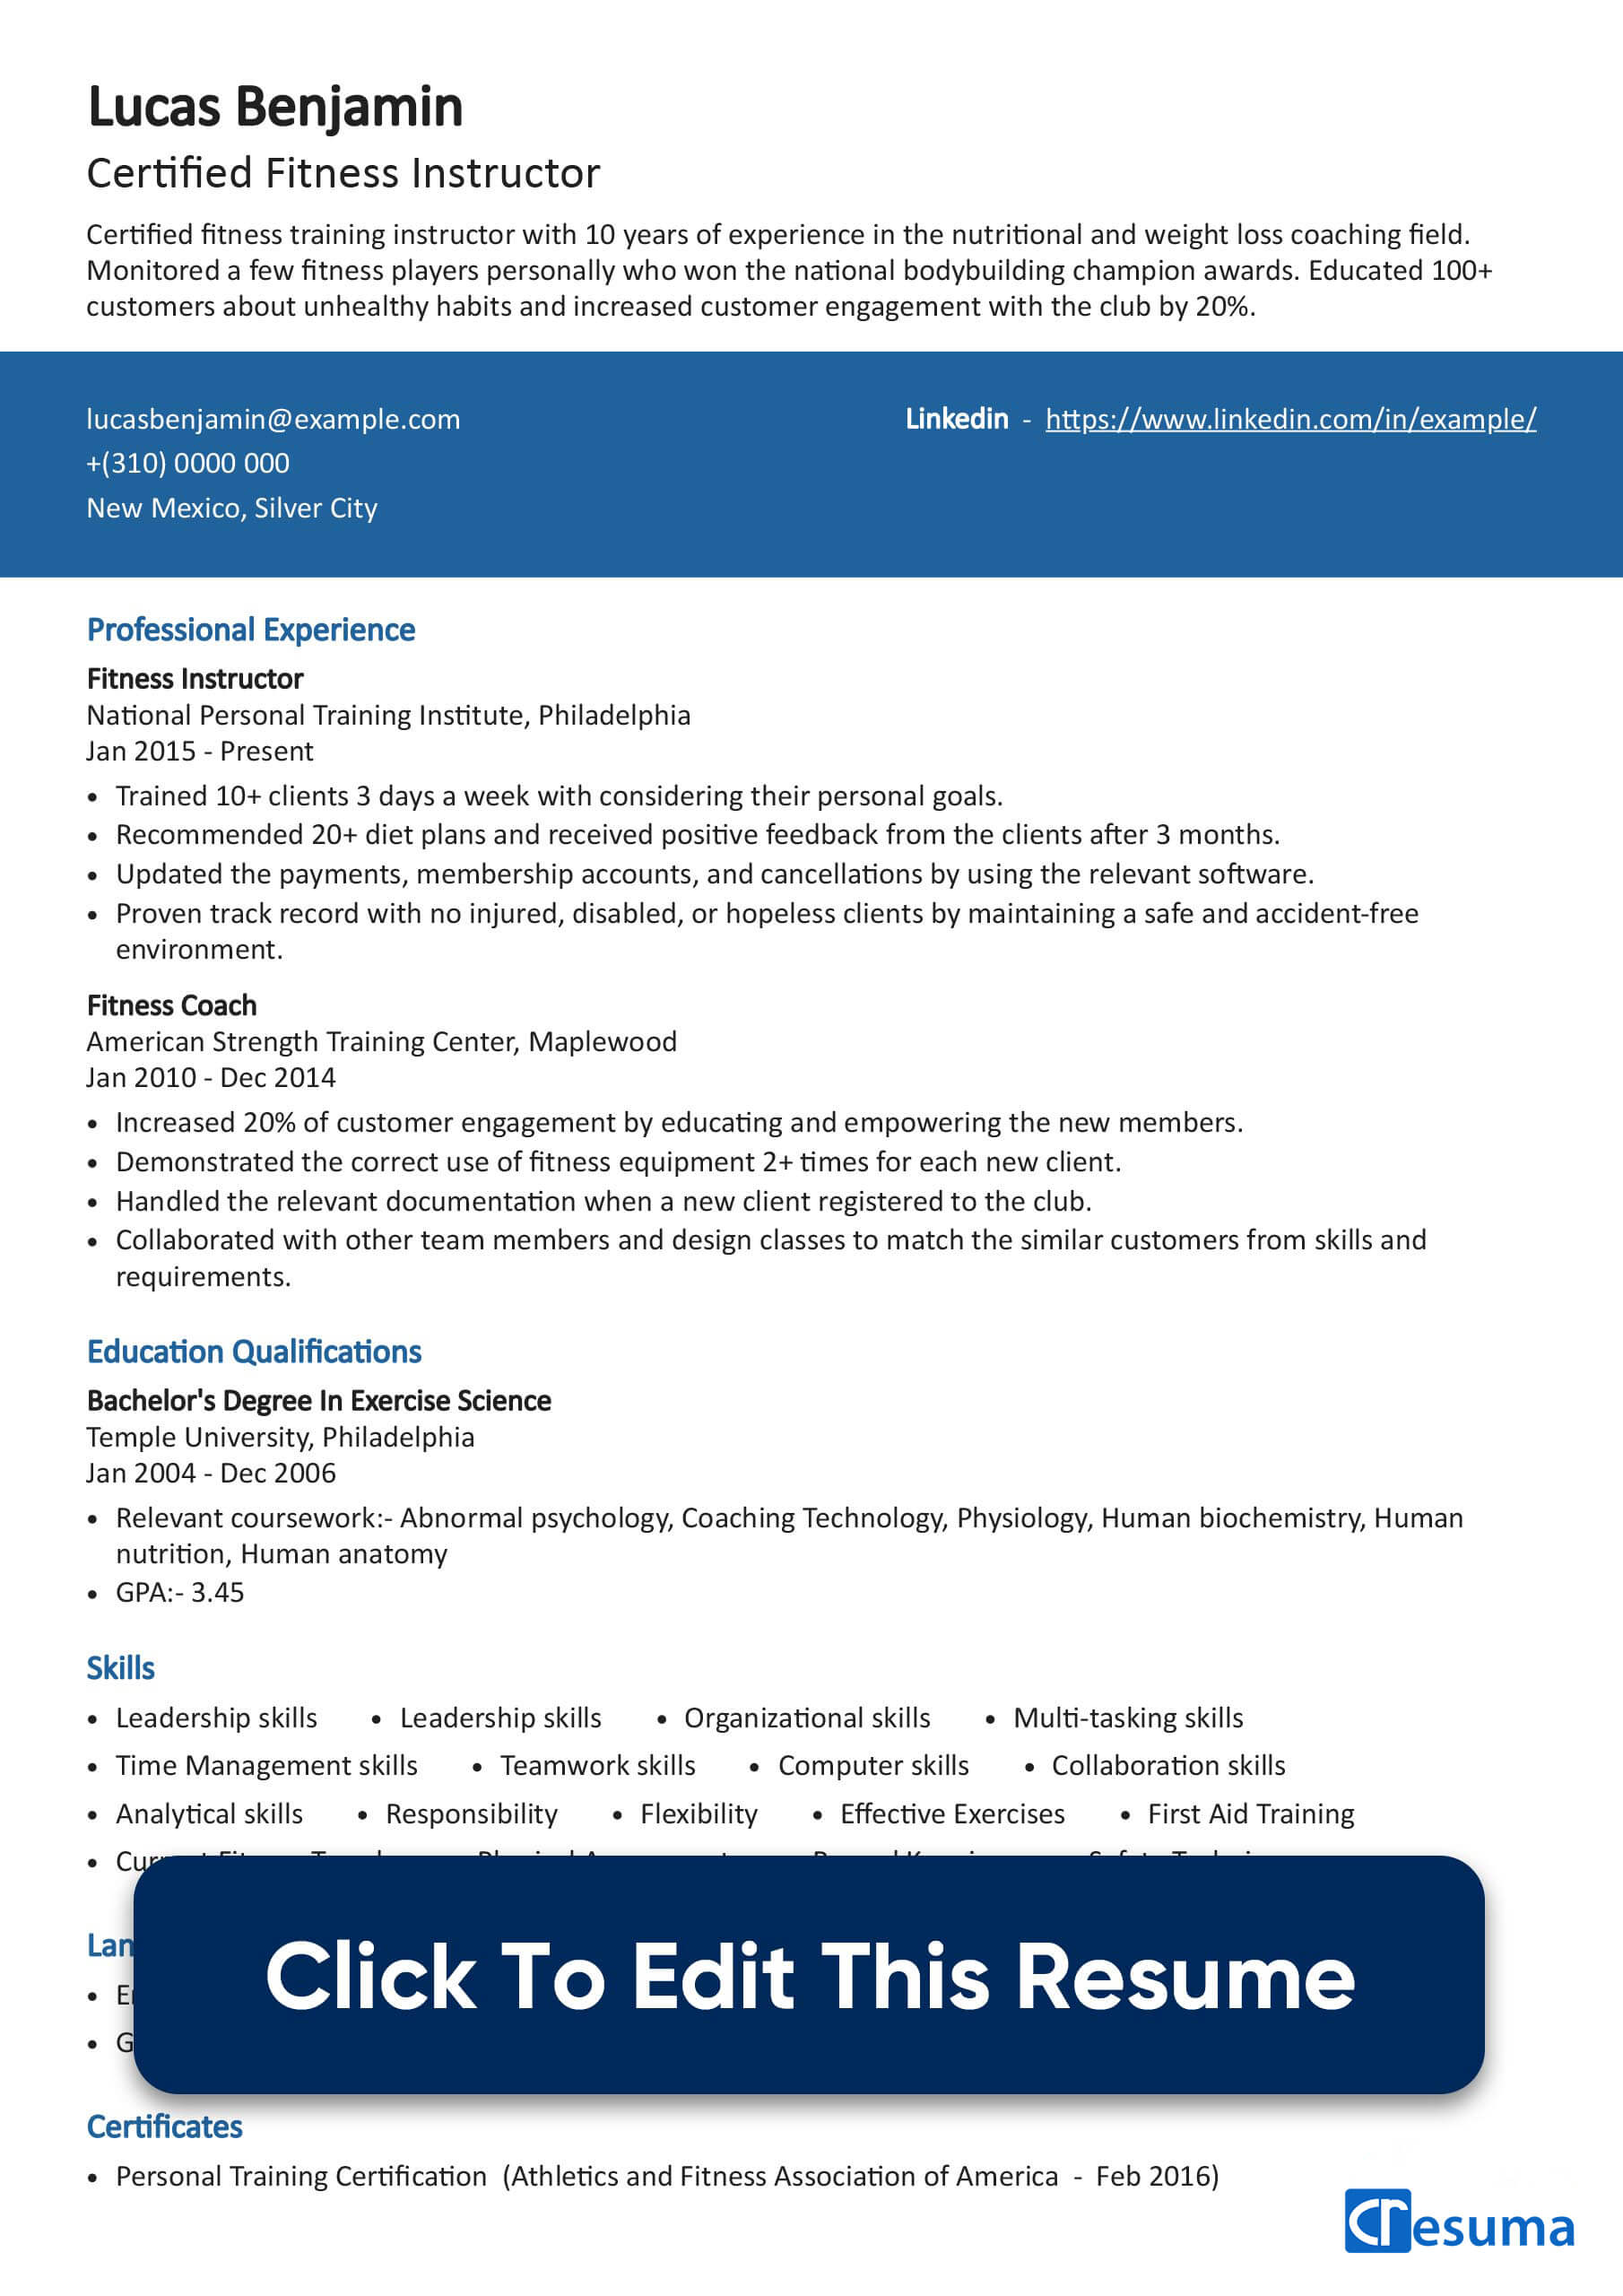 Fitness Instructor resume example image